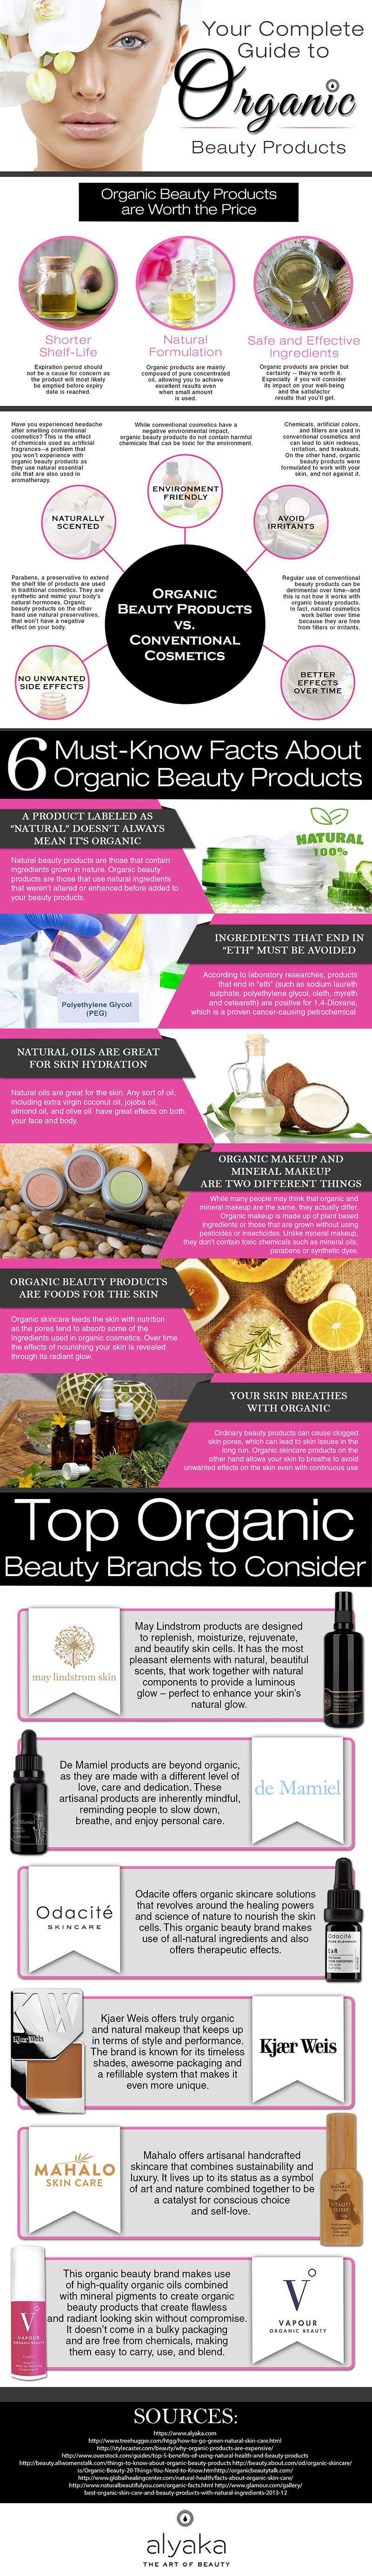 Guide to Organic Beauty Products